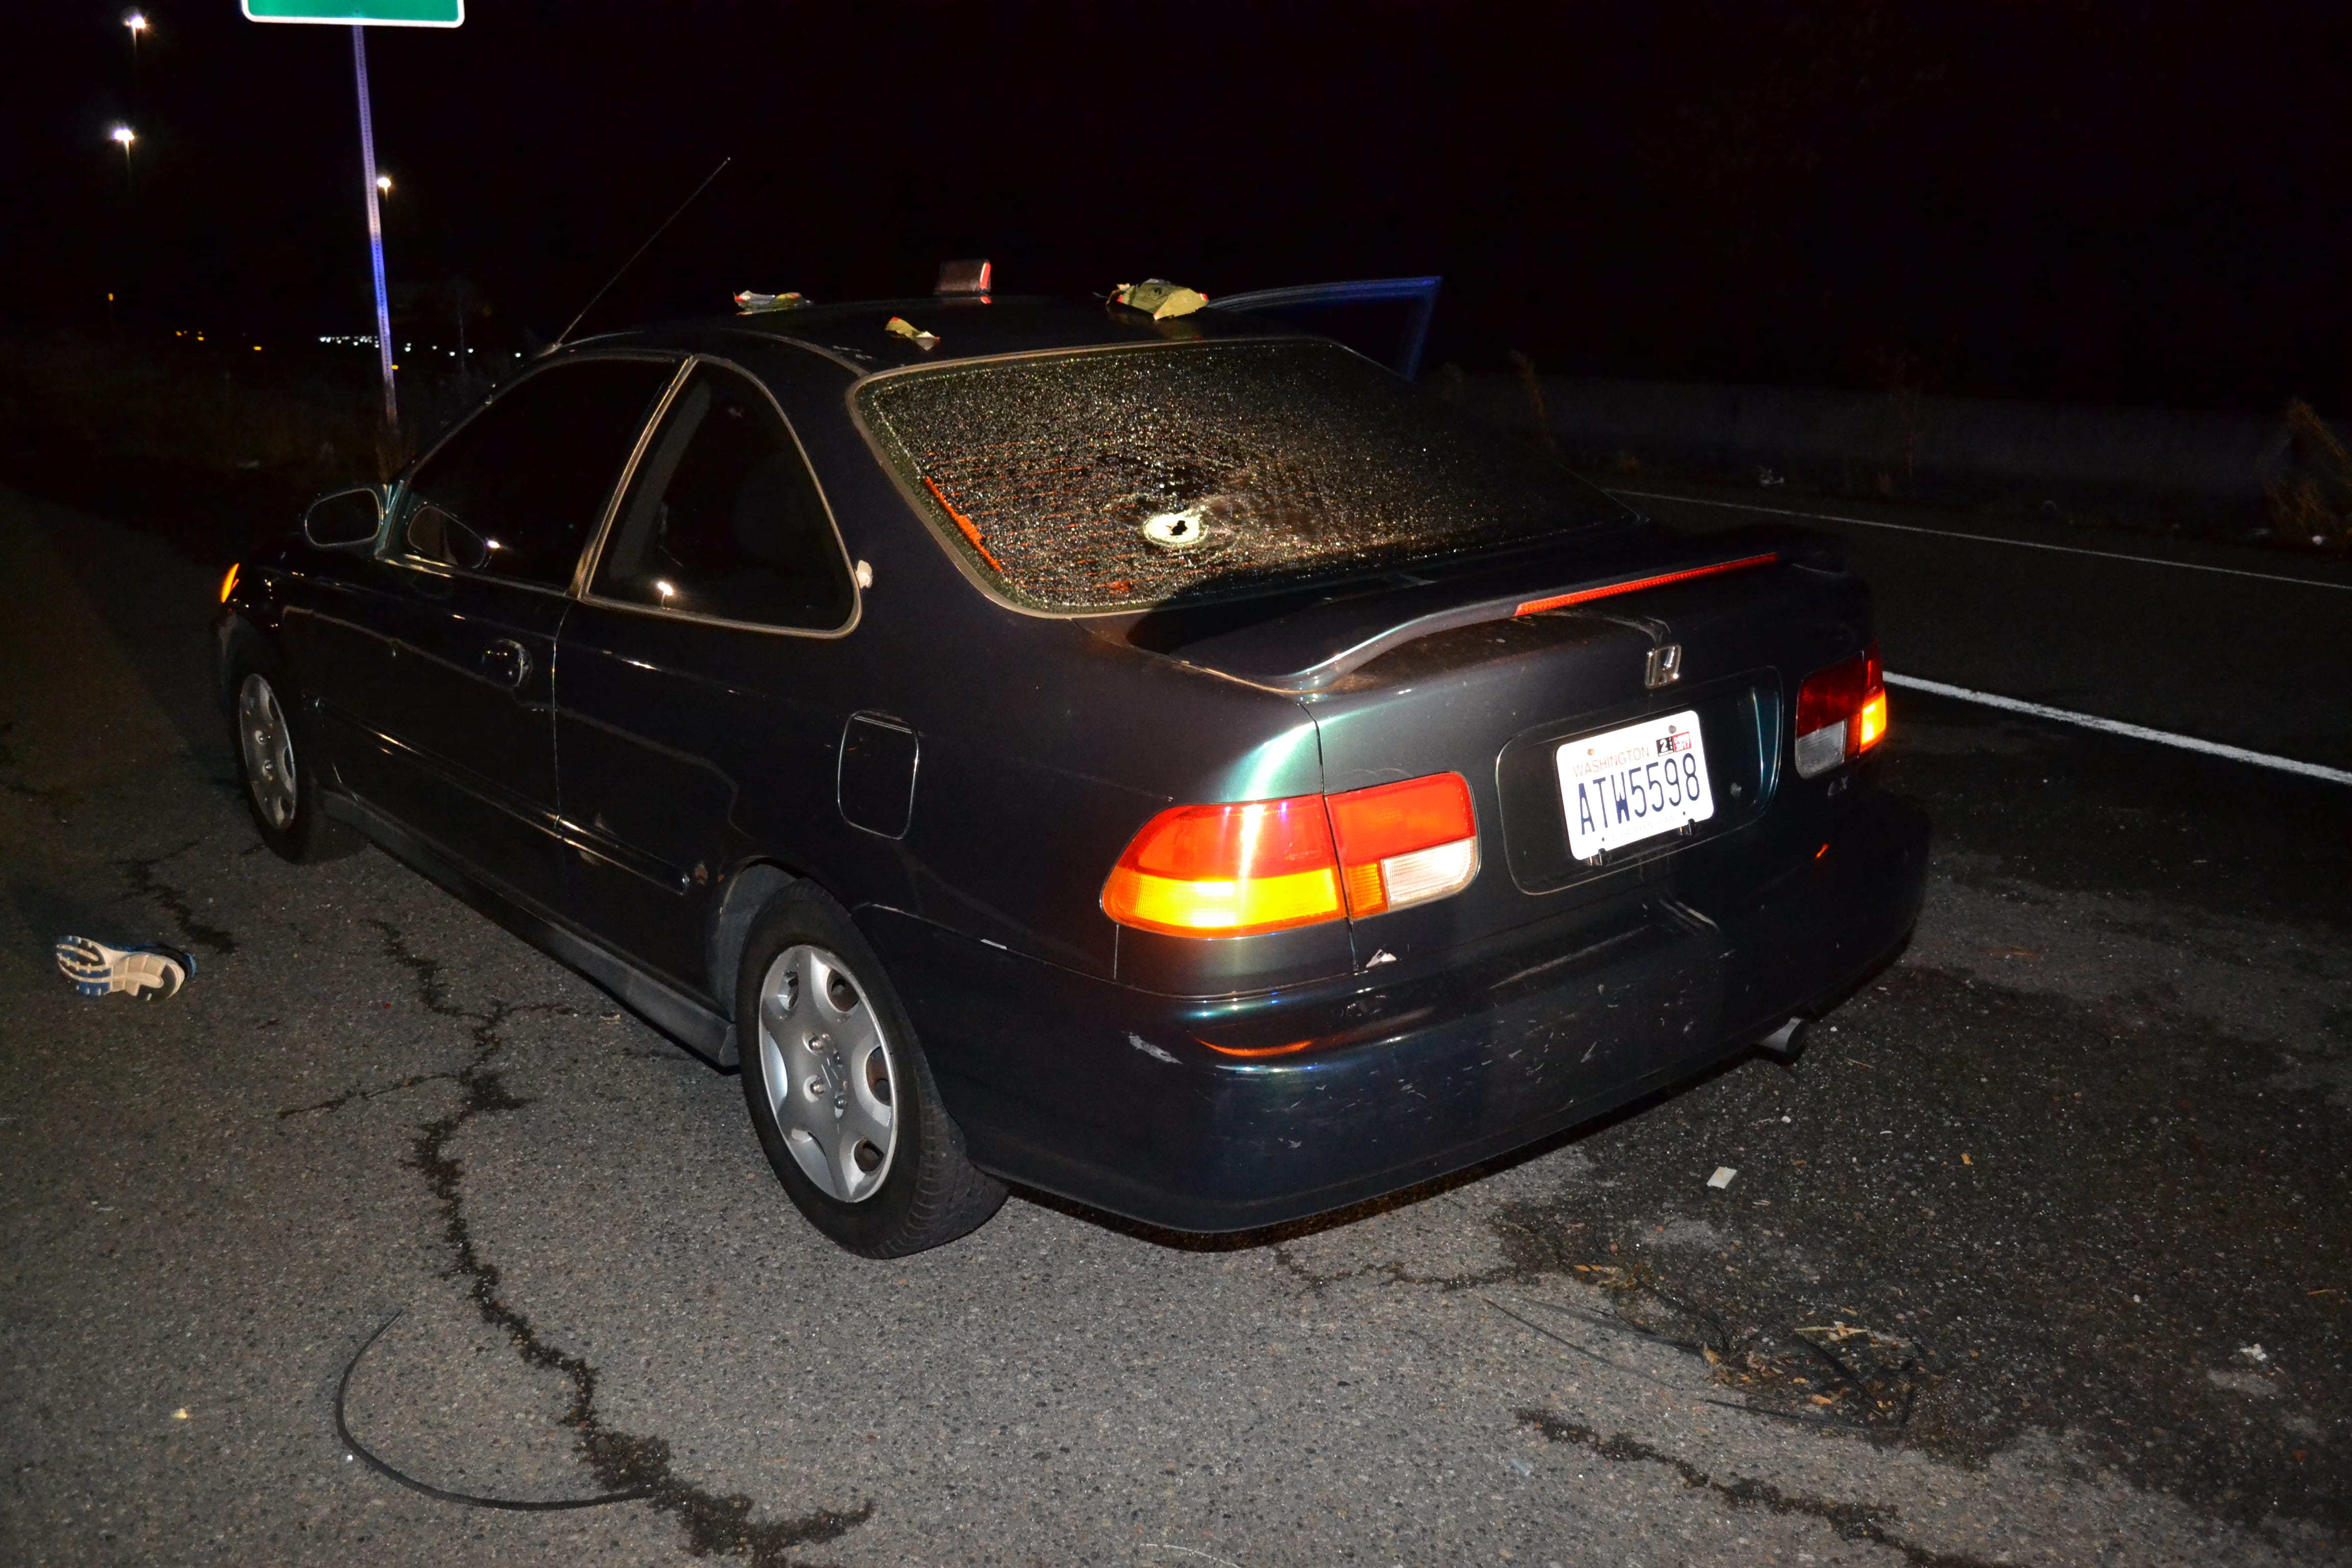 Detectives are asking that anyone who witnessed or who has information on drive-by shooting last week on state Highway 500 to contact Detective Jennifer Ortiz at 360-449-7948 or Jennifer.ortiz@wsp.wa.gov.